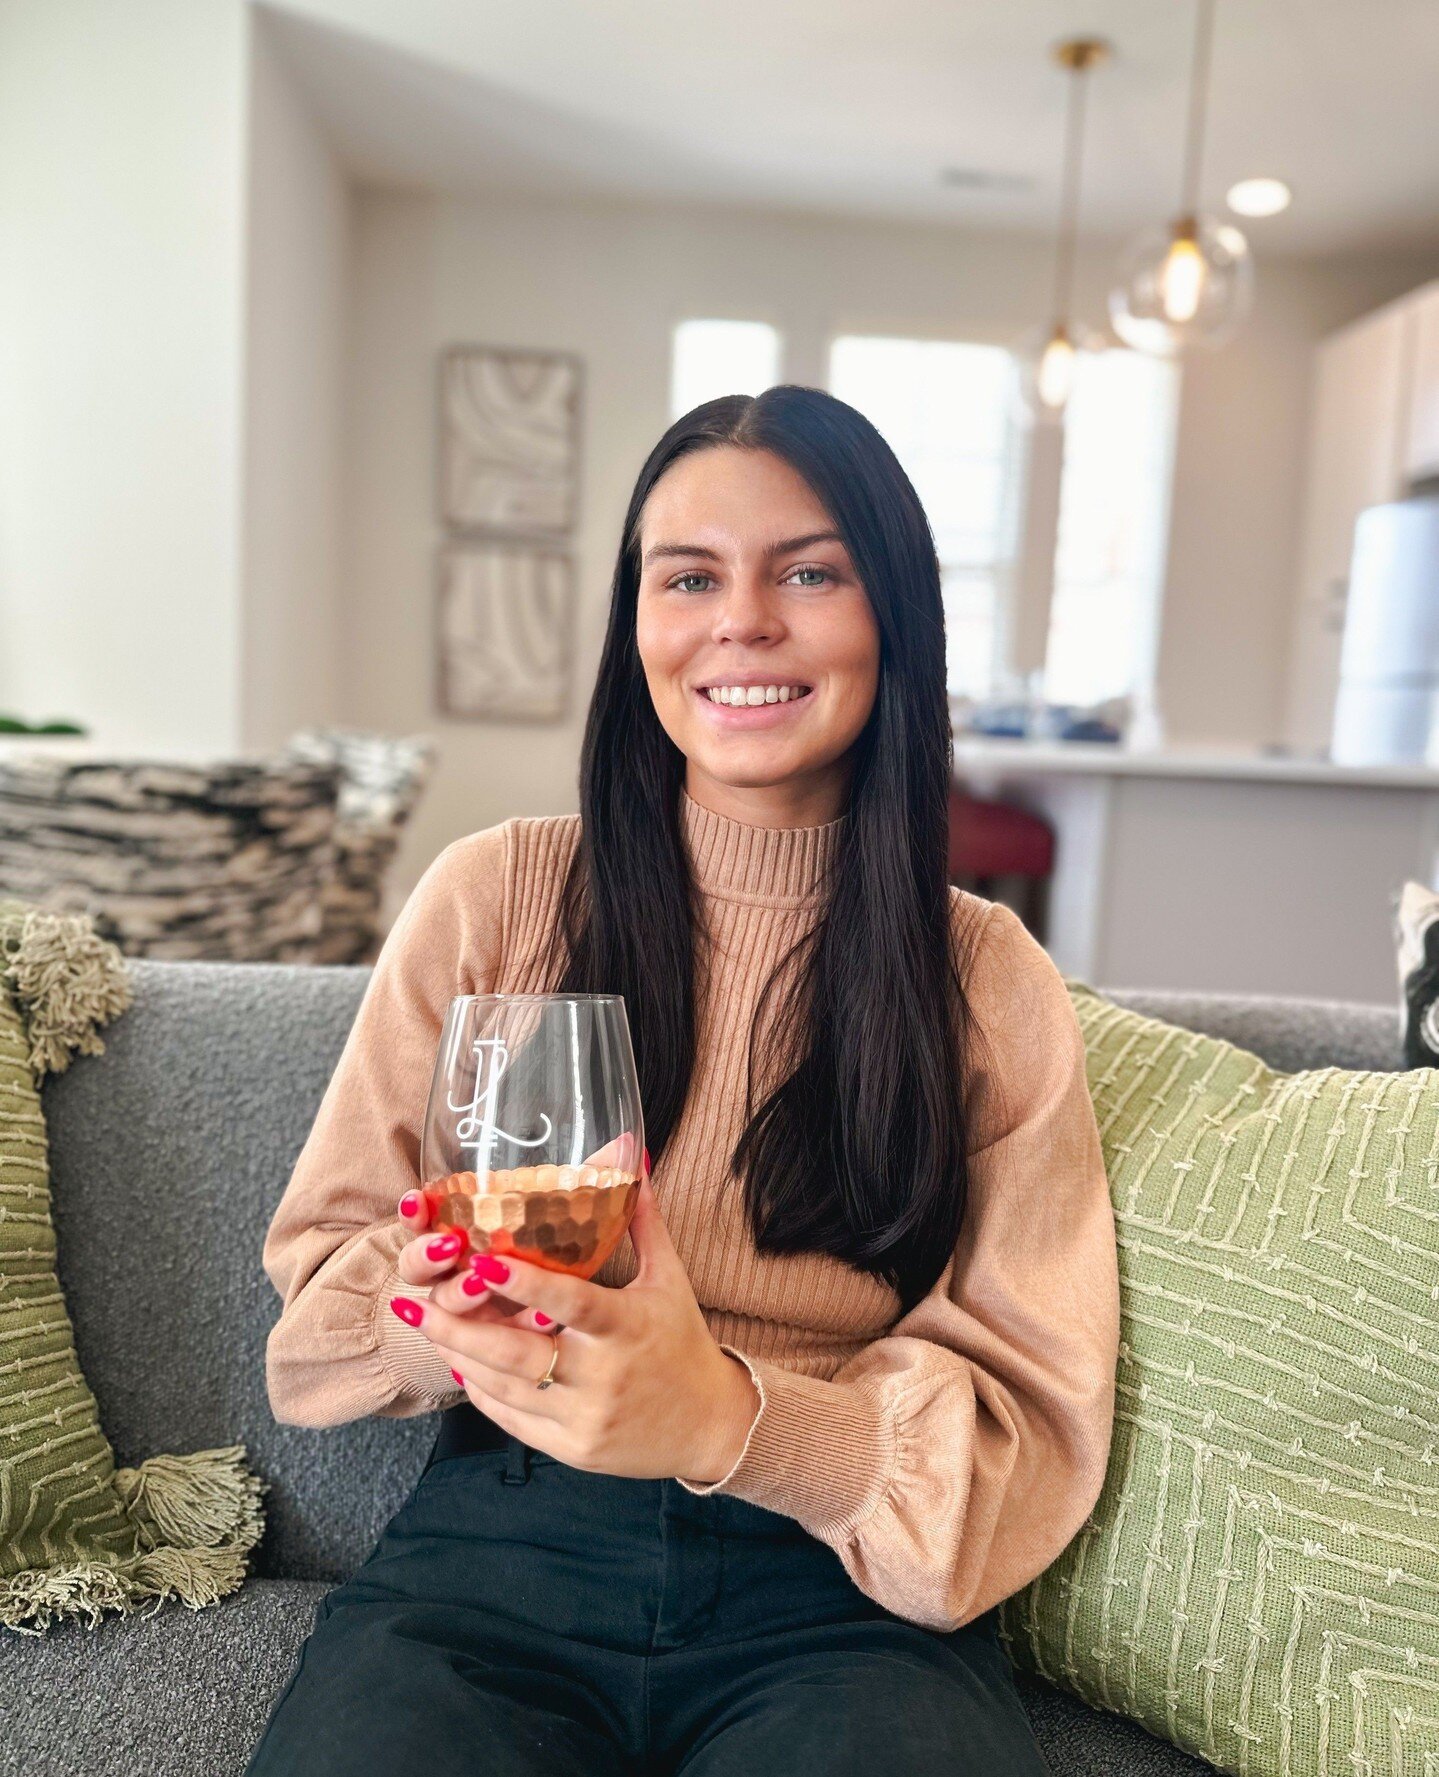 Introducing our leasing agent at Lusso Apartments, Madison! ⁠
⁠
Madison is so excited to assist each and every one of you in your journey to find your dream apartment. She will be your resource for any questions you may have and would love to give yo